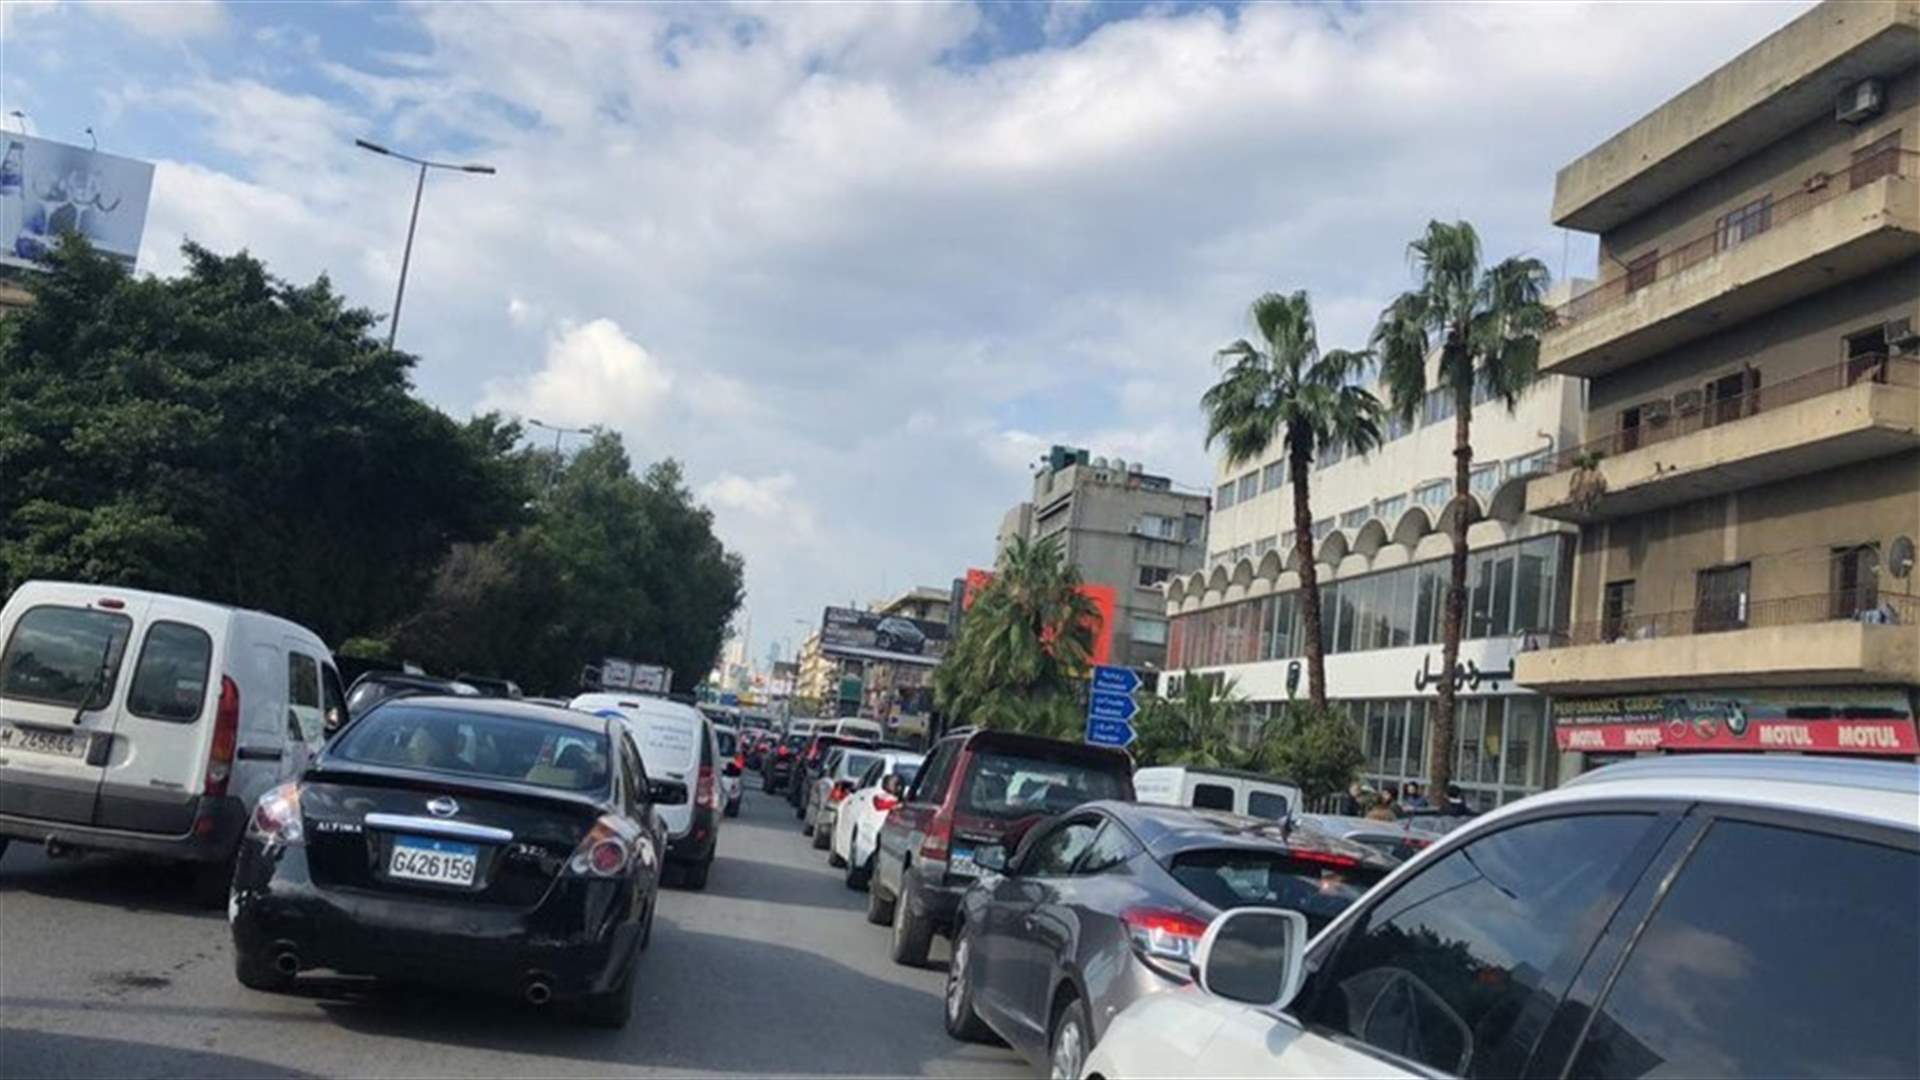 Commuters get stuck in their vehicles after closing roads in Beirut